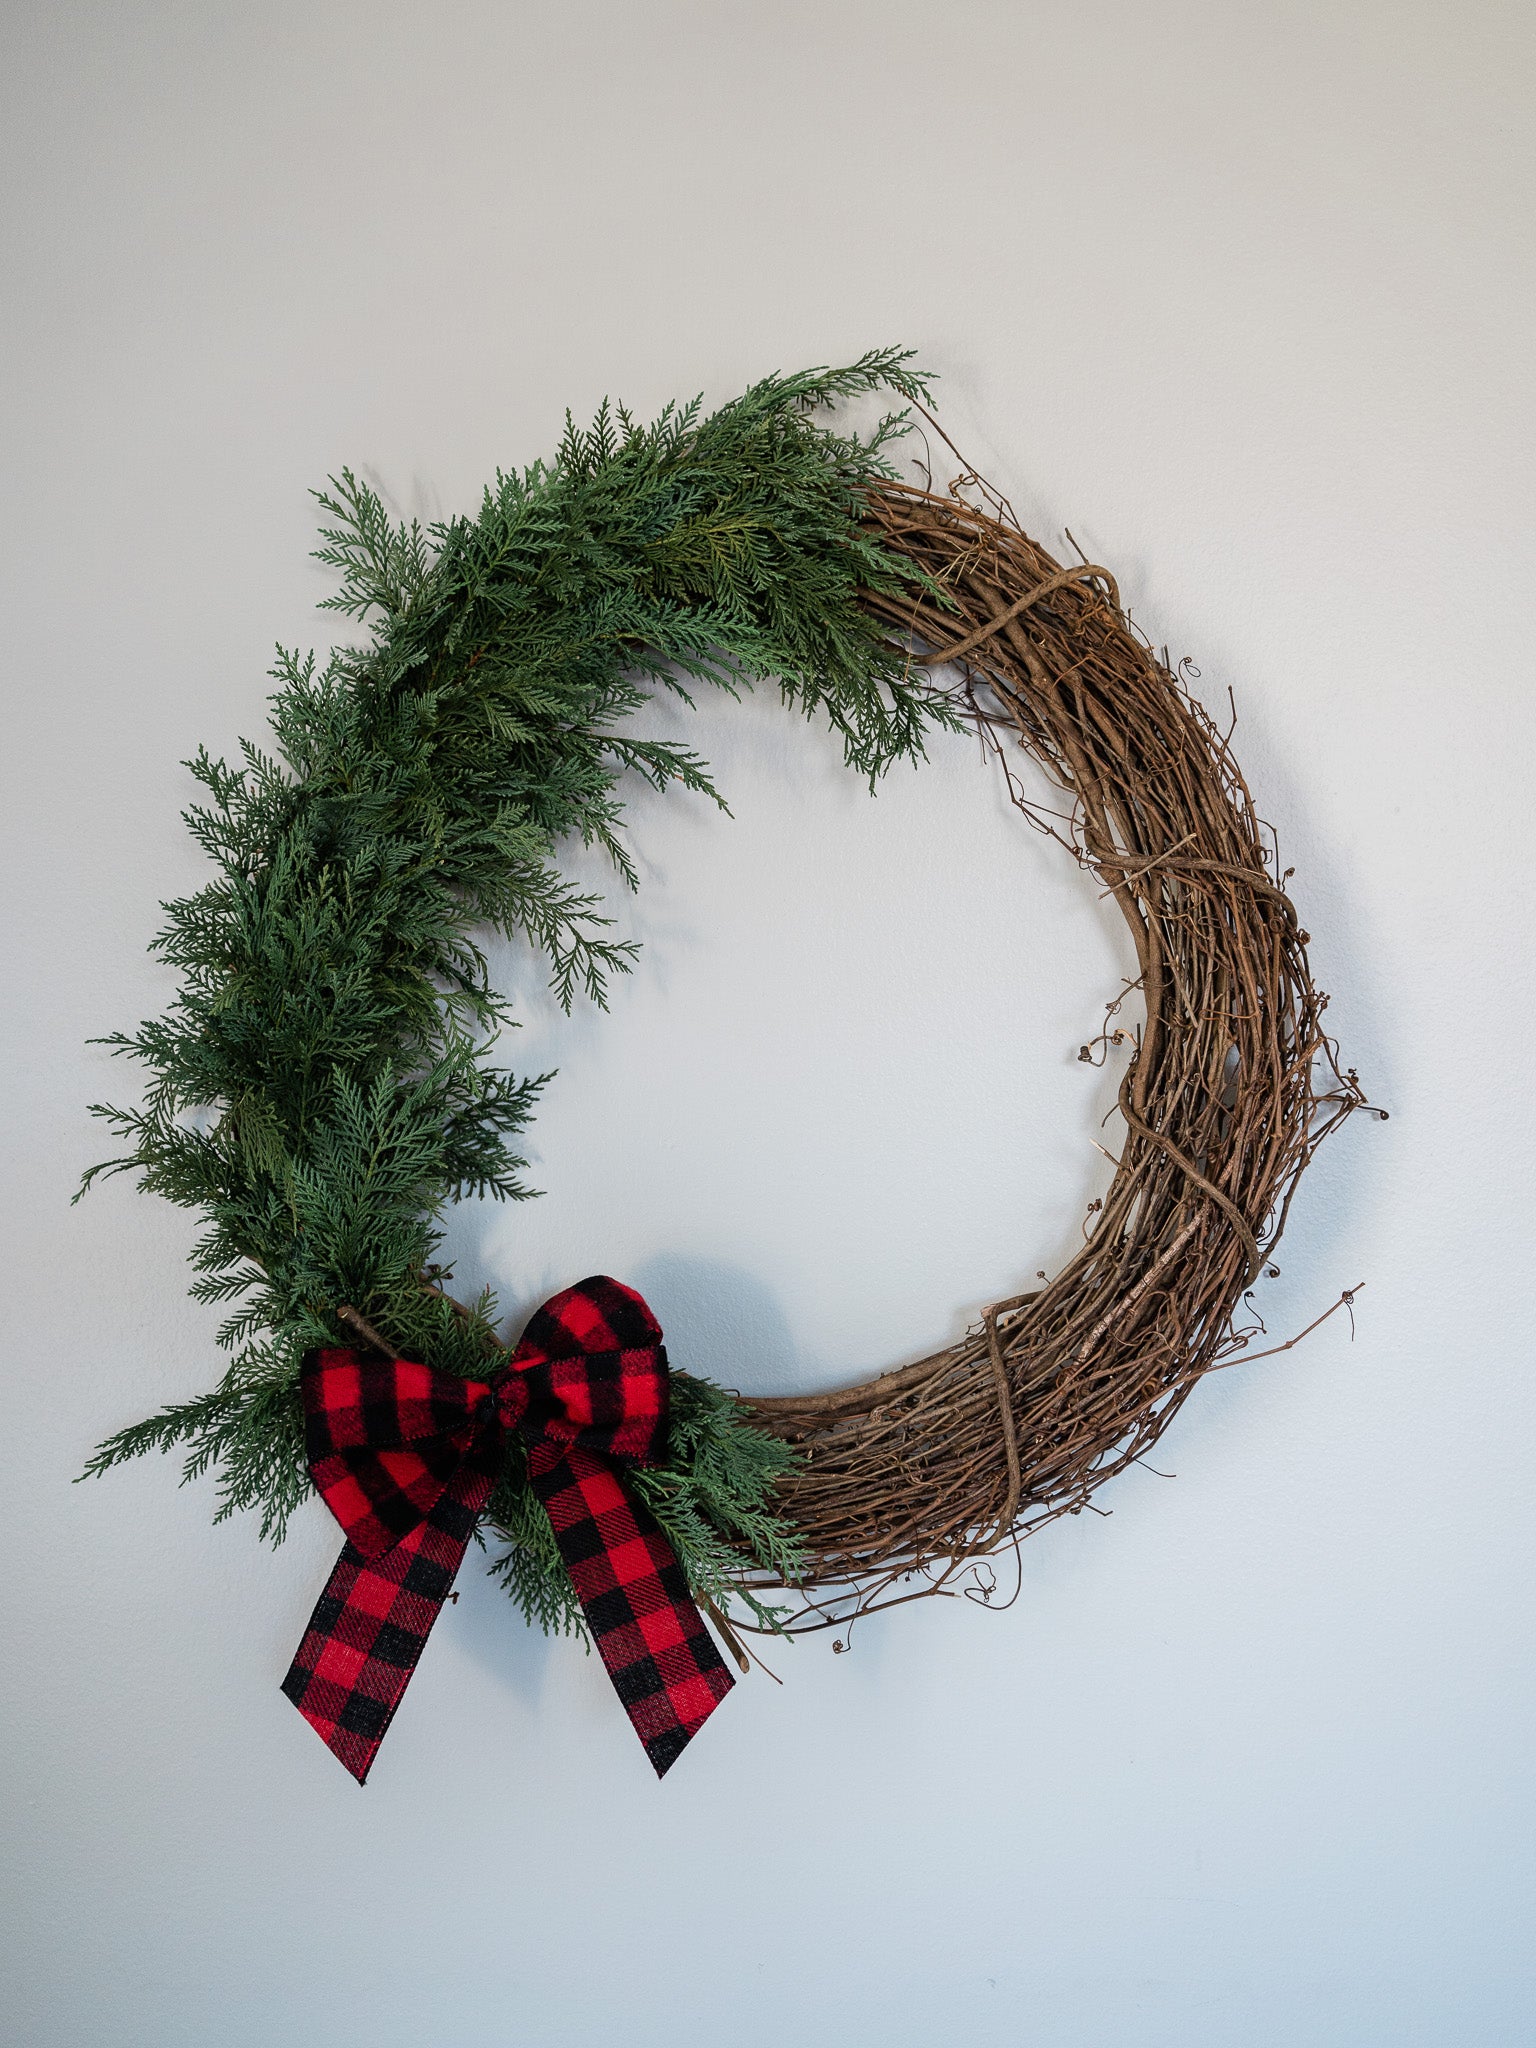 Holiday Wreath Workshop Tuesday, November 28th 6pm-7:30pm